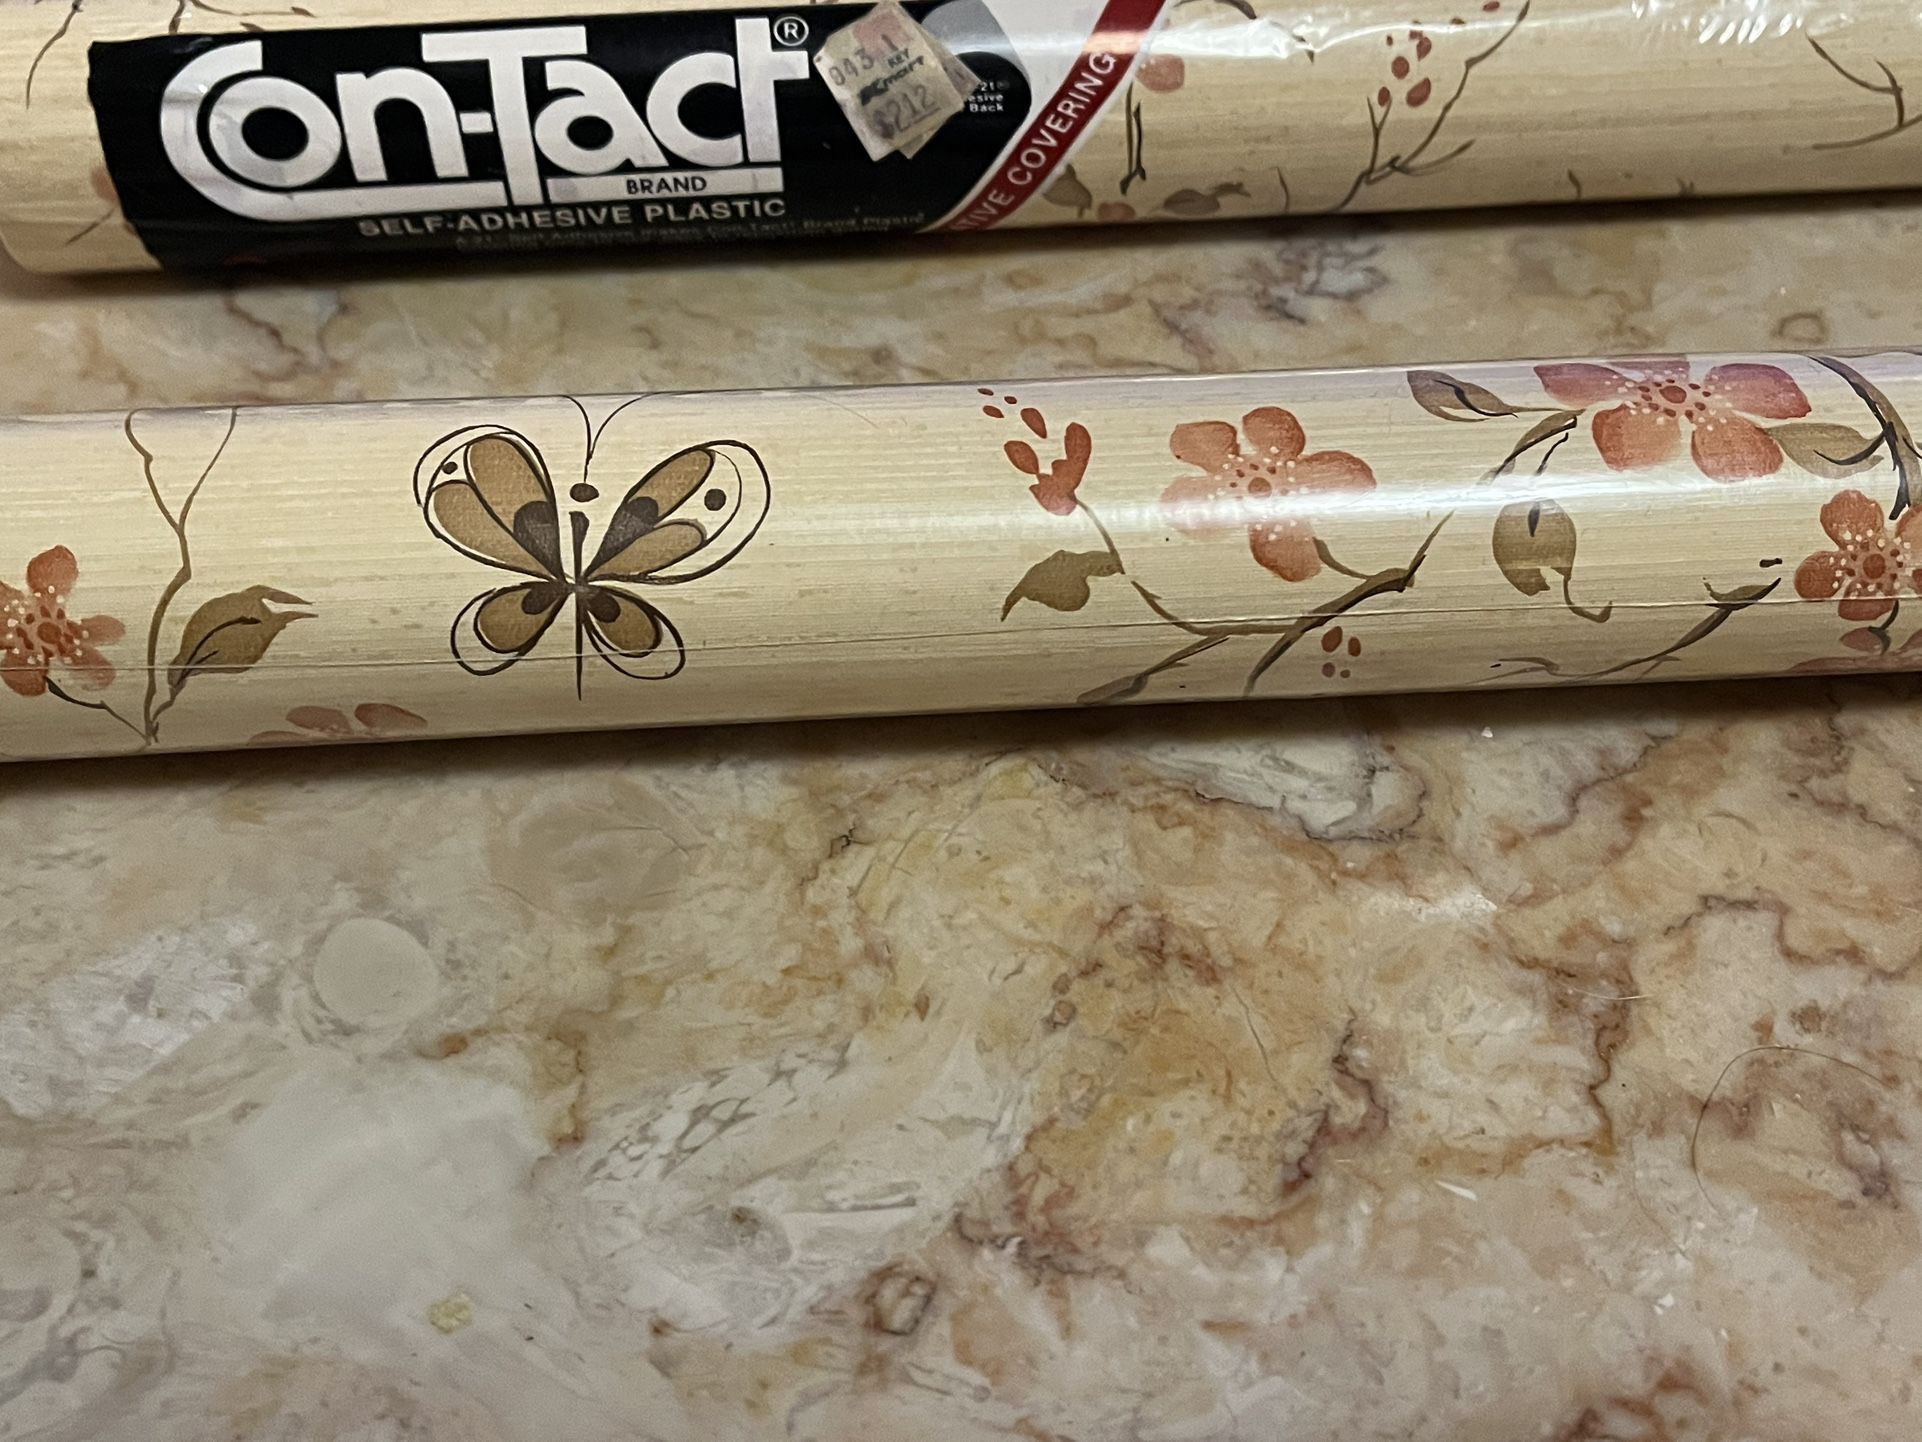 4 Rolls Vintage Contact Paper Self-Adhesive 1980s Flowers/Butterflys Brown #9223, #9228